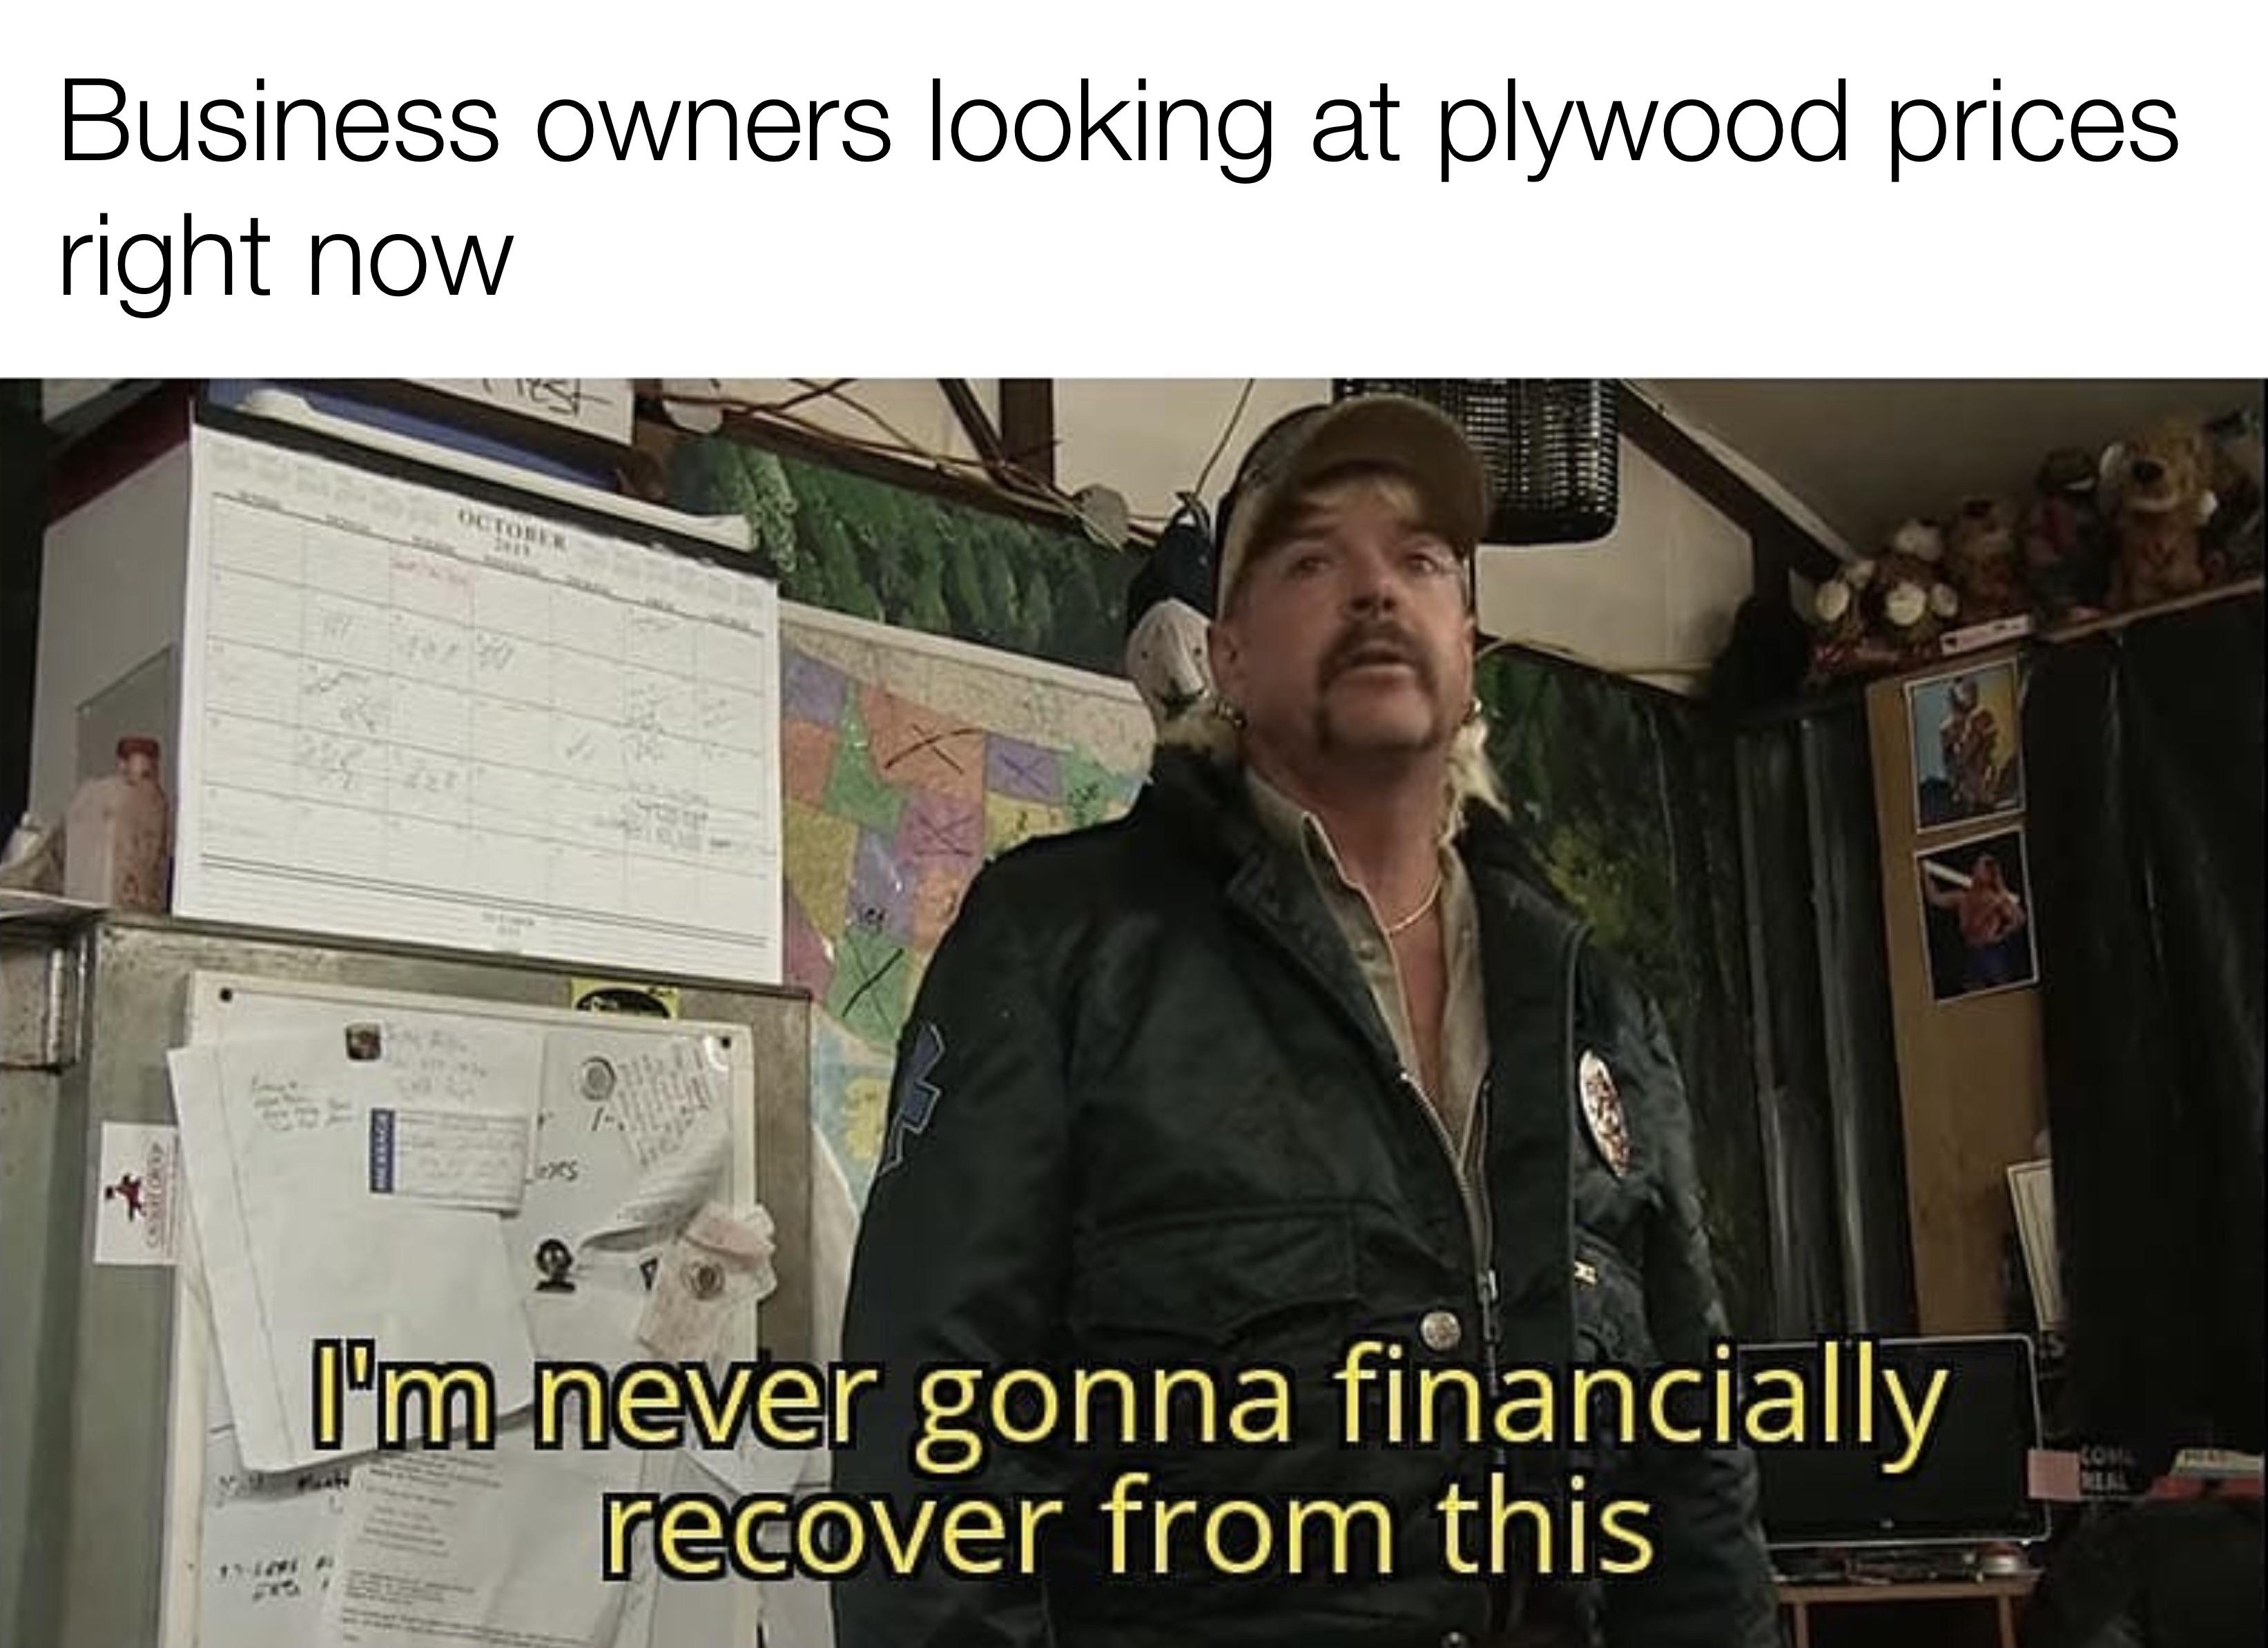 dank memes - Im never gonna financially recover from this meme - Business owners looking at plywood prices right now en I'm never gonna financially recover from this